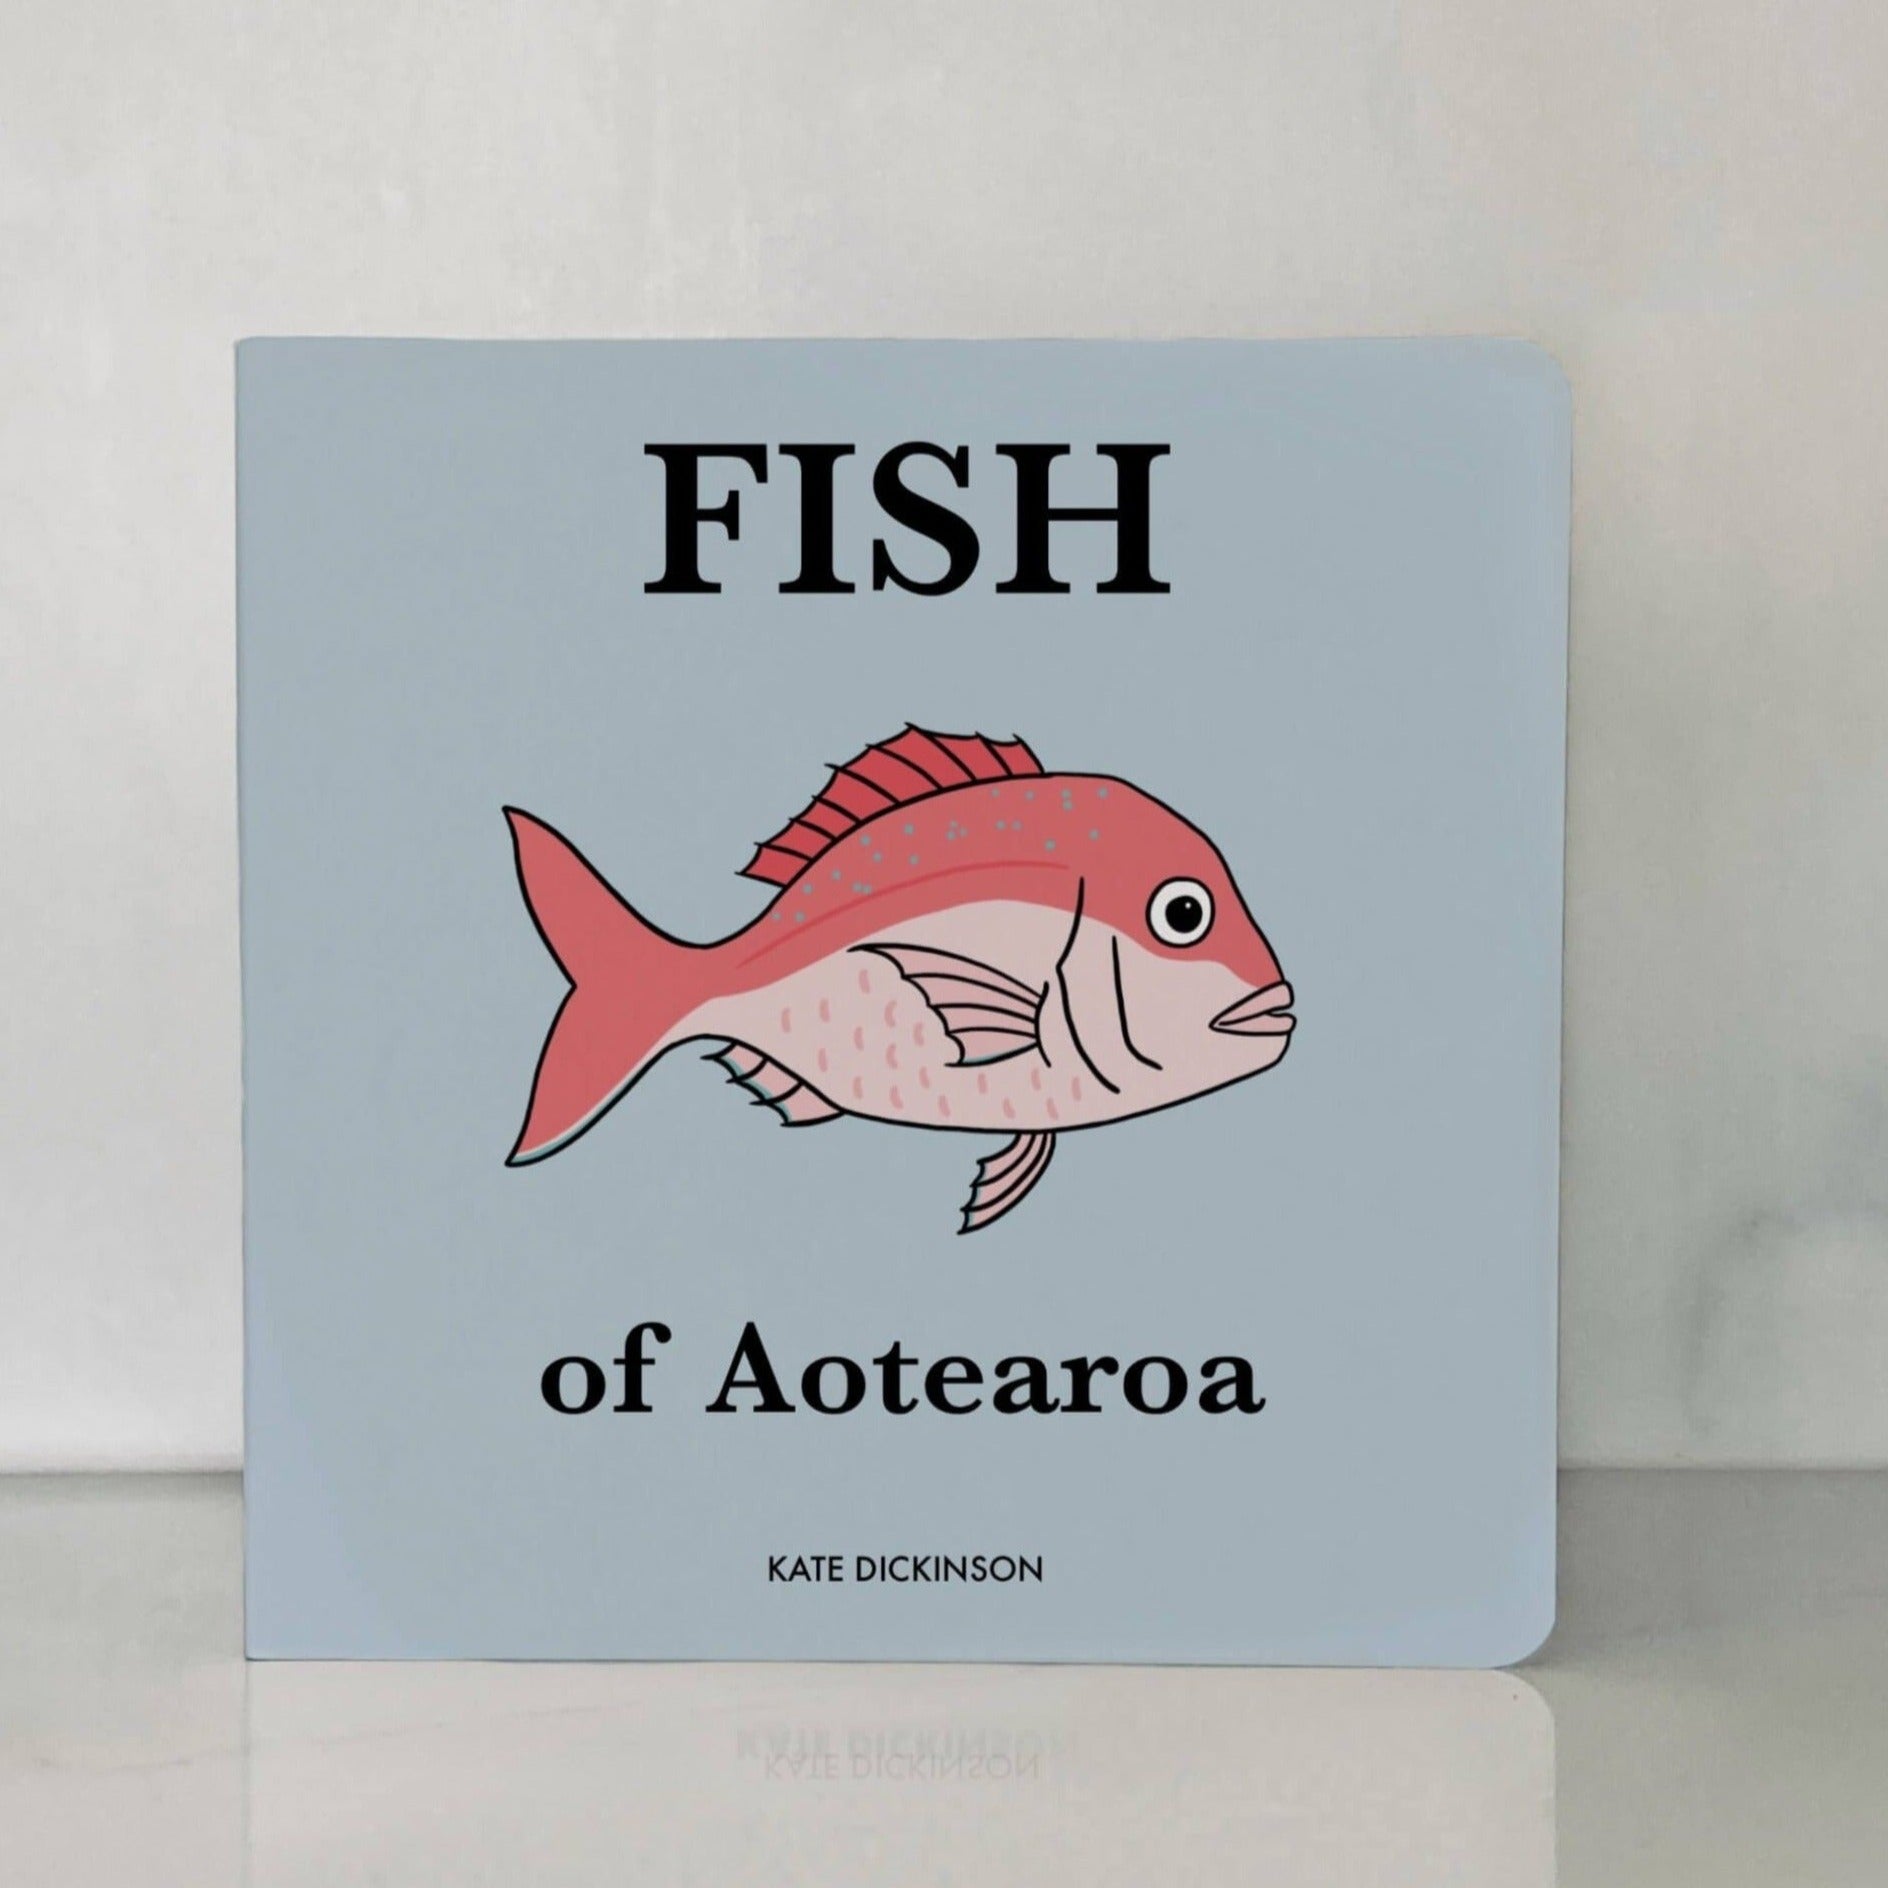 Fish of Aotearoa by Kate Dickinson from As We Are Illustration available at Bear & Moo